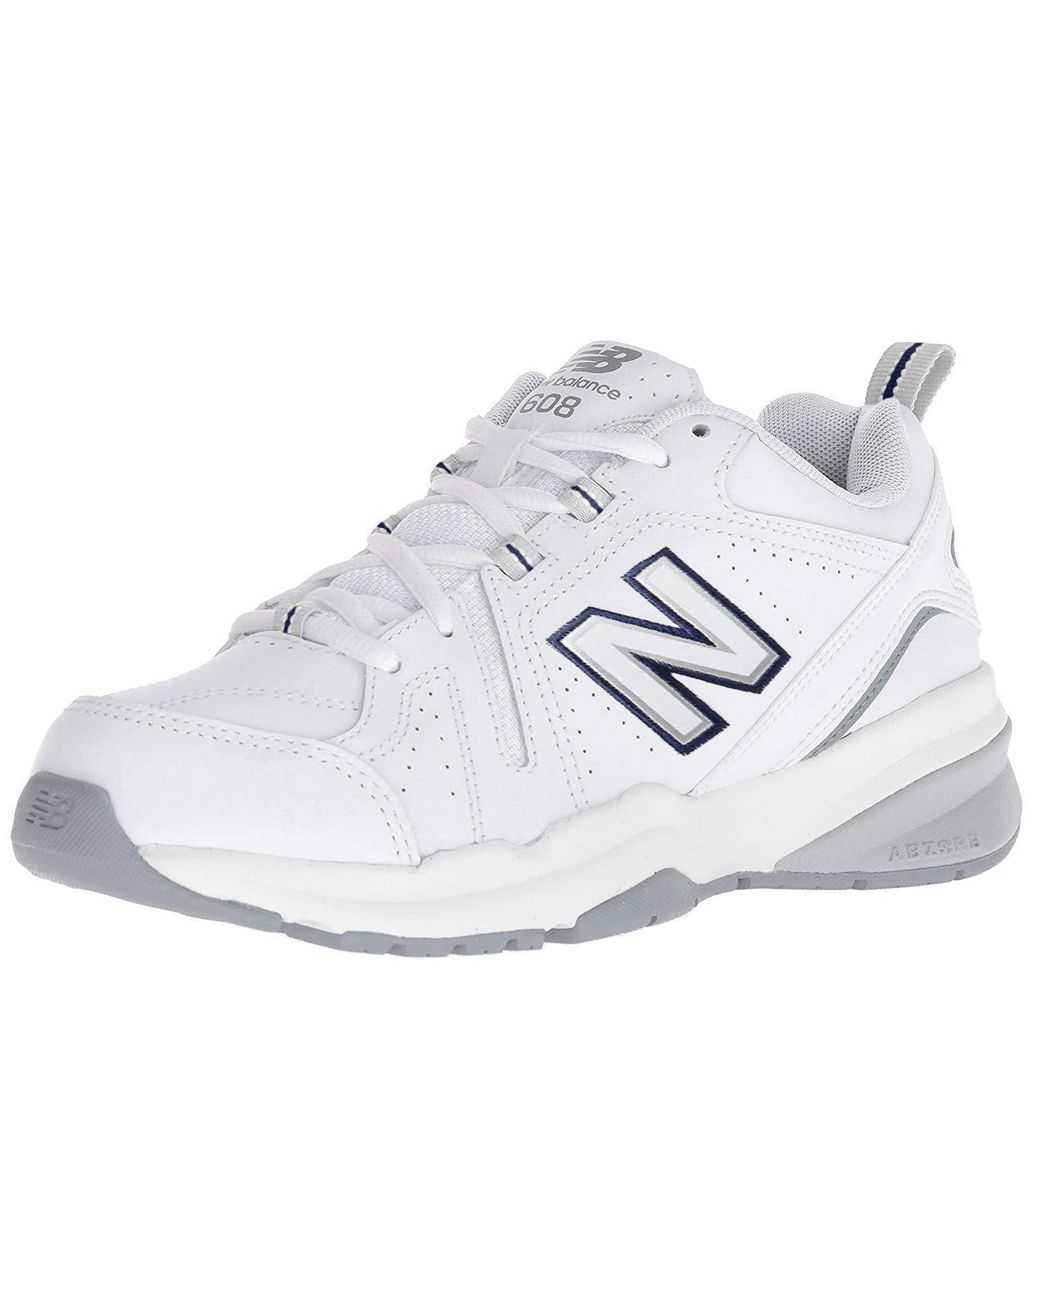 New Balance Suede 608 V5 Cross Trainer in White - Save 3% - Lyst